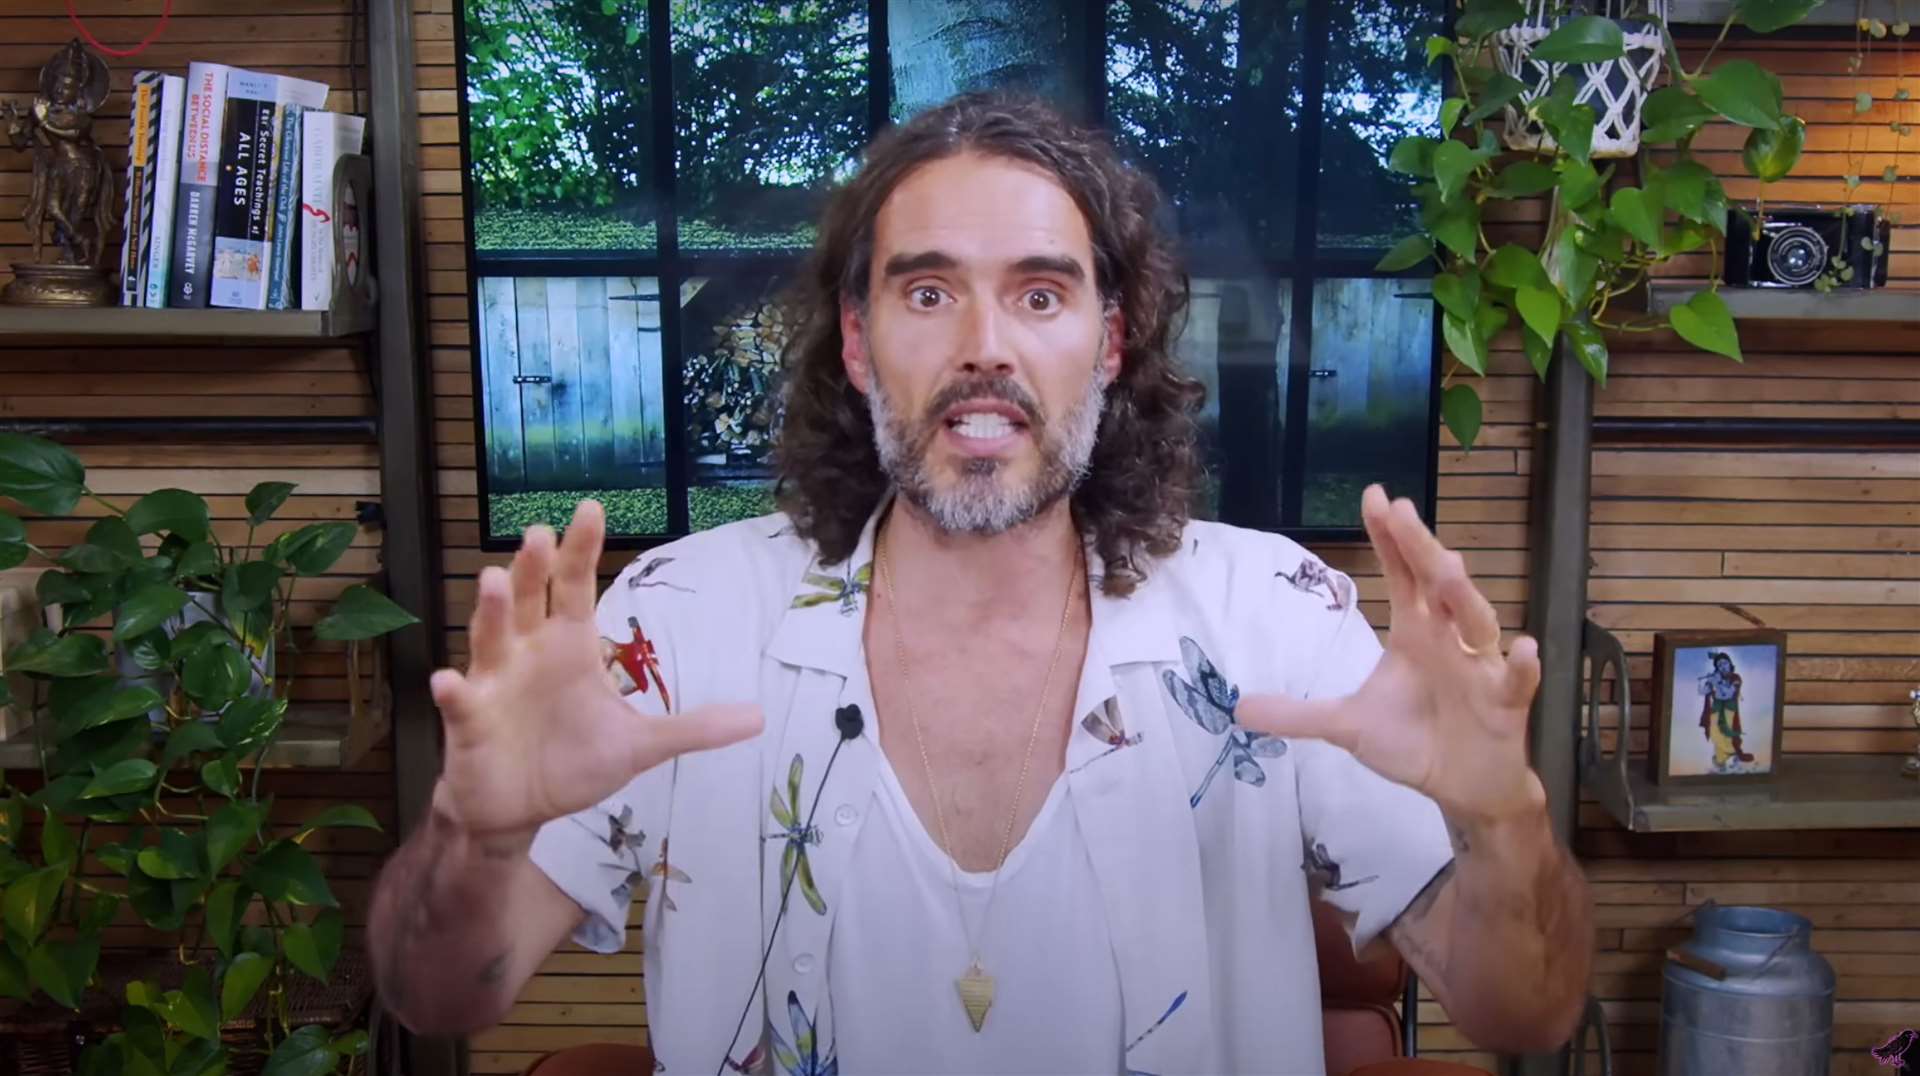 An image taken from the YouTube page of Russell Brand who has posted a video online saying he ‘absolutely’ denies unspecified criminal allegations about his personal life outlined in two ‘extremely disturbing letters’ (Russell Brand/PA)